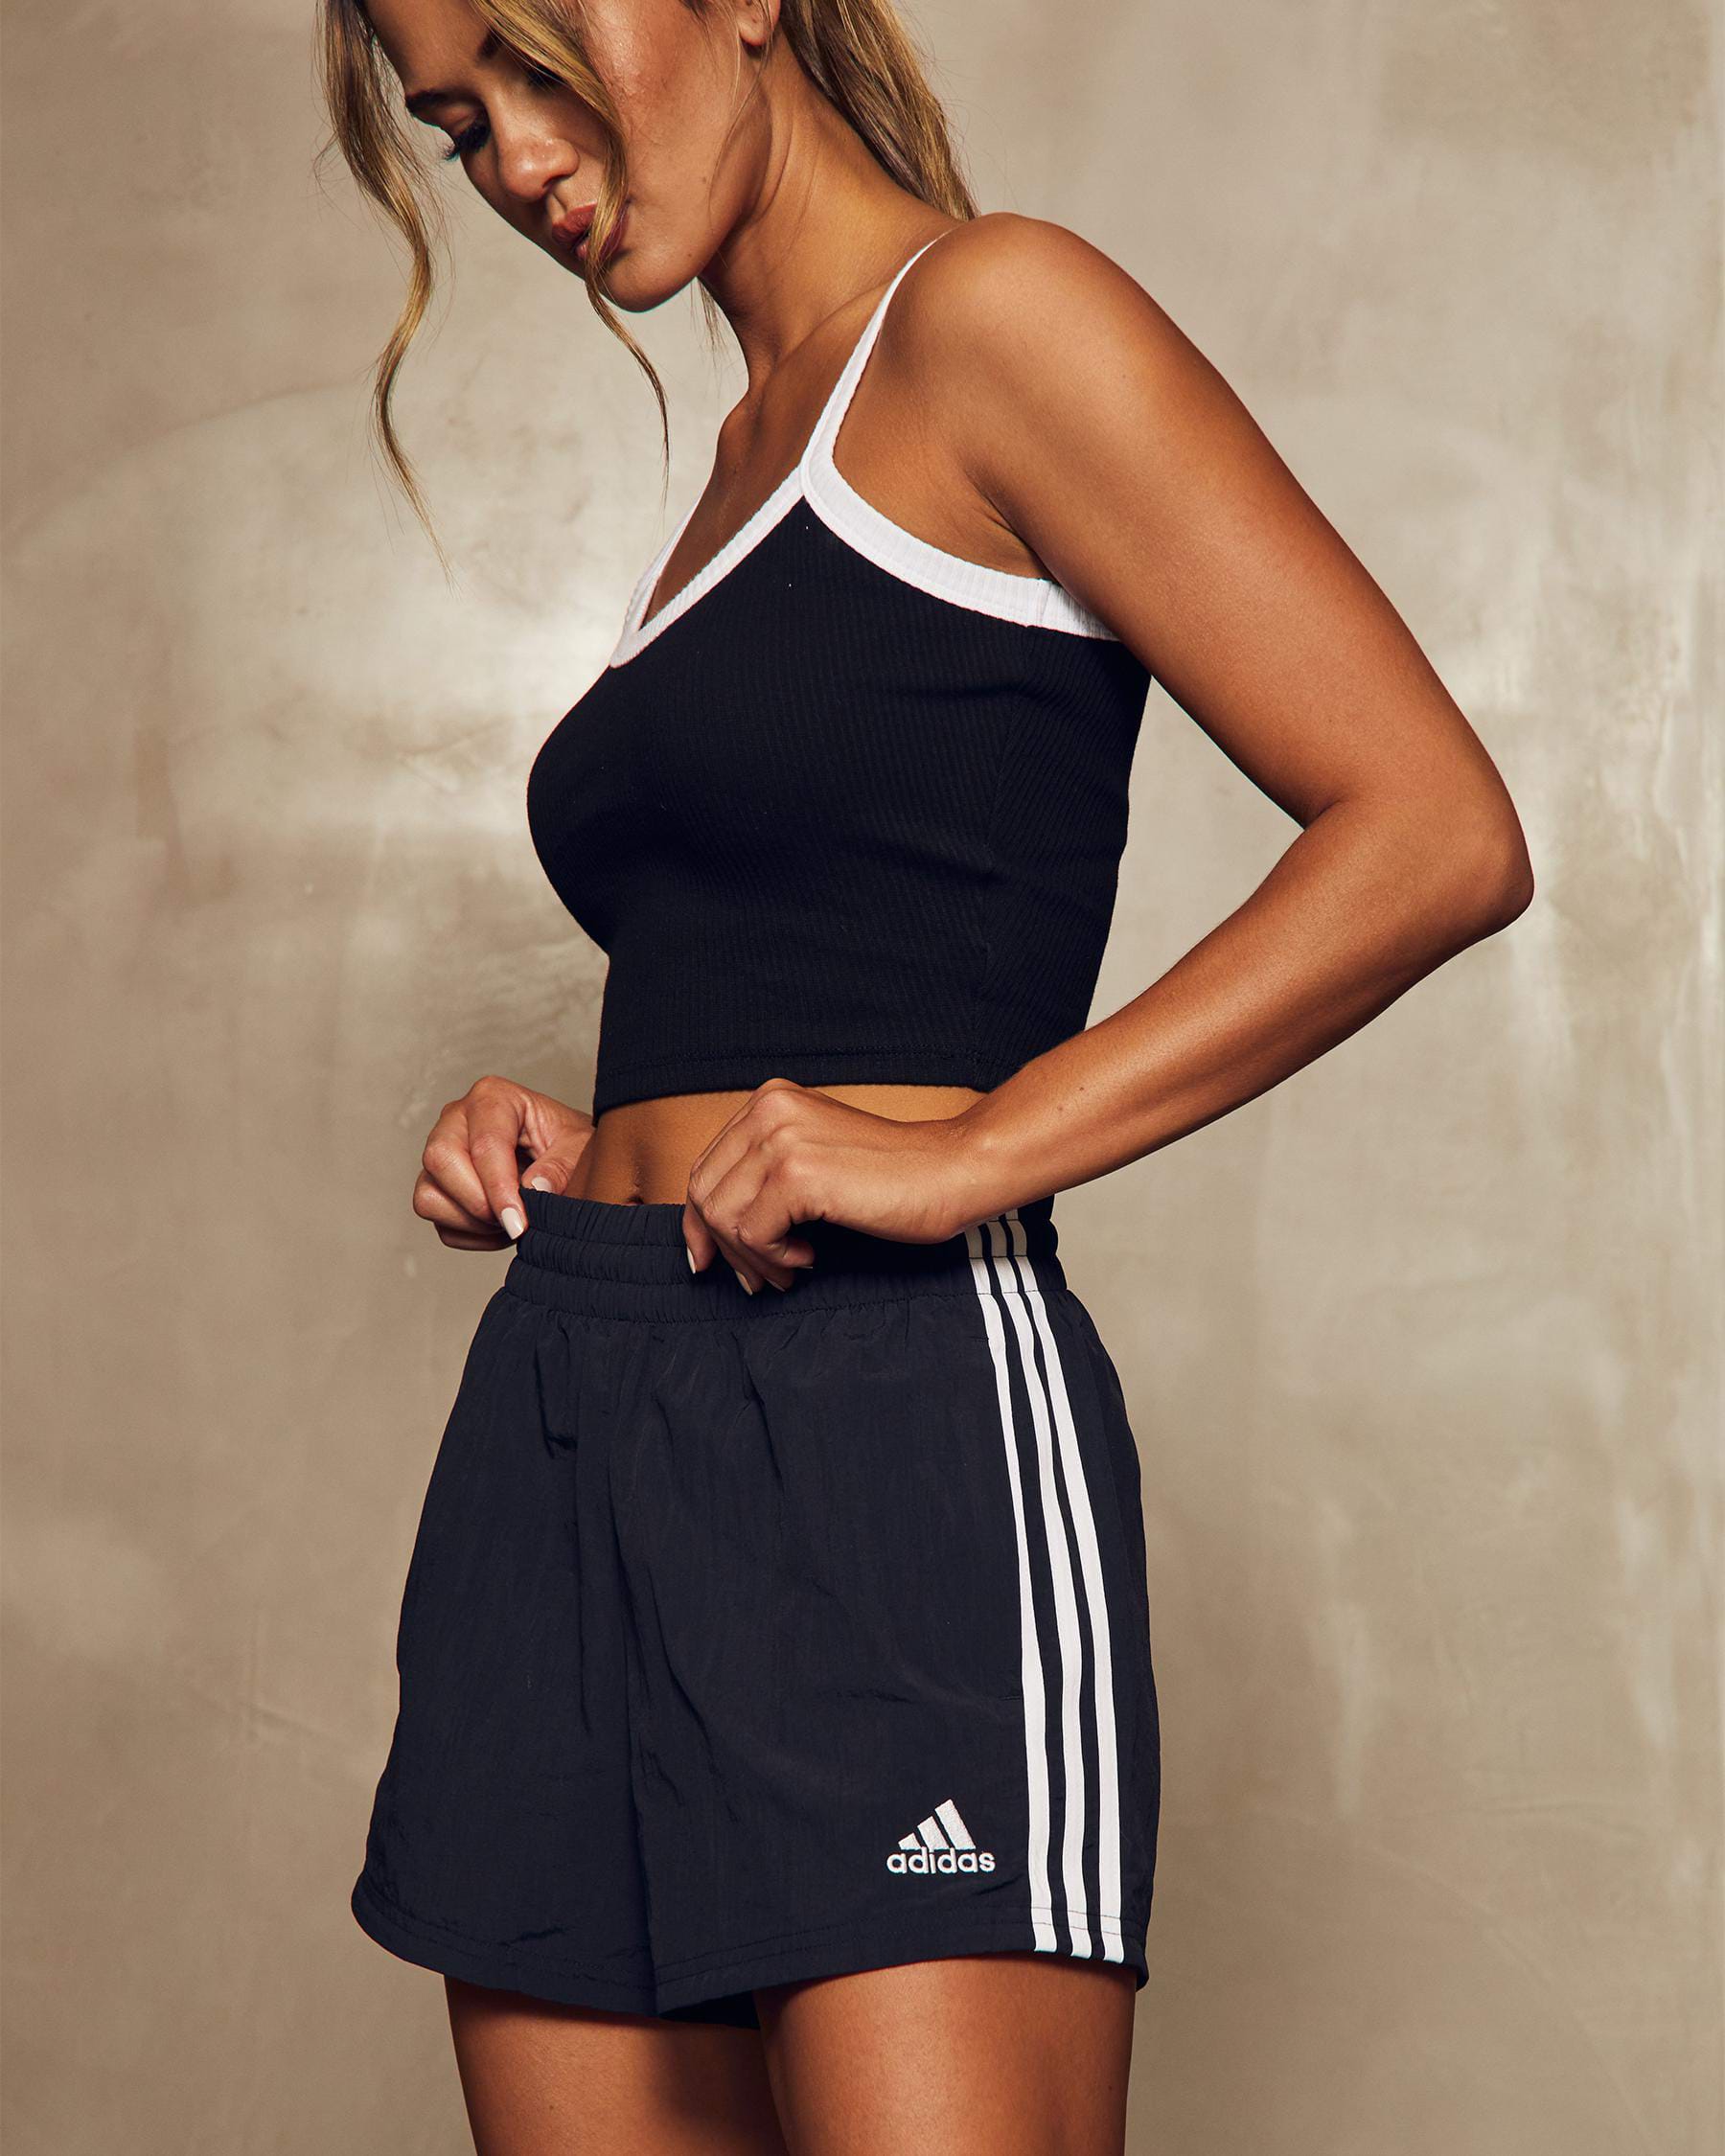 Adidas Essentials 3 Stripe Woven Shorts In Black/white - FREE* Shipping &  Easy Returns - City Beach United States